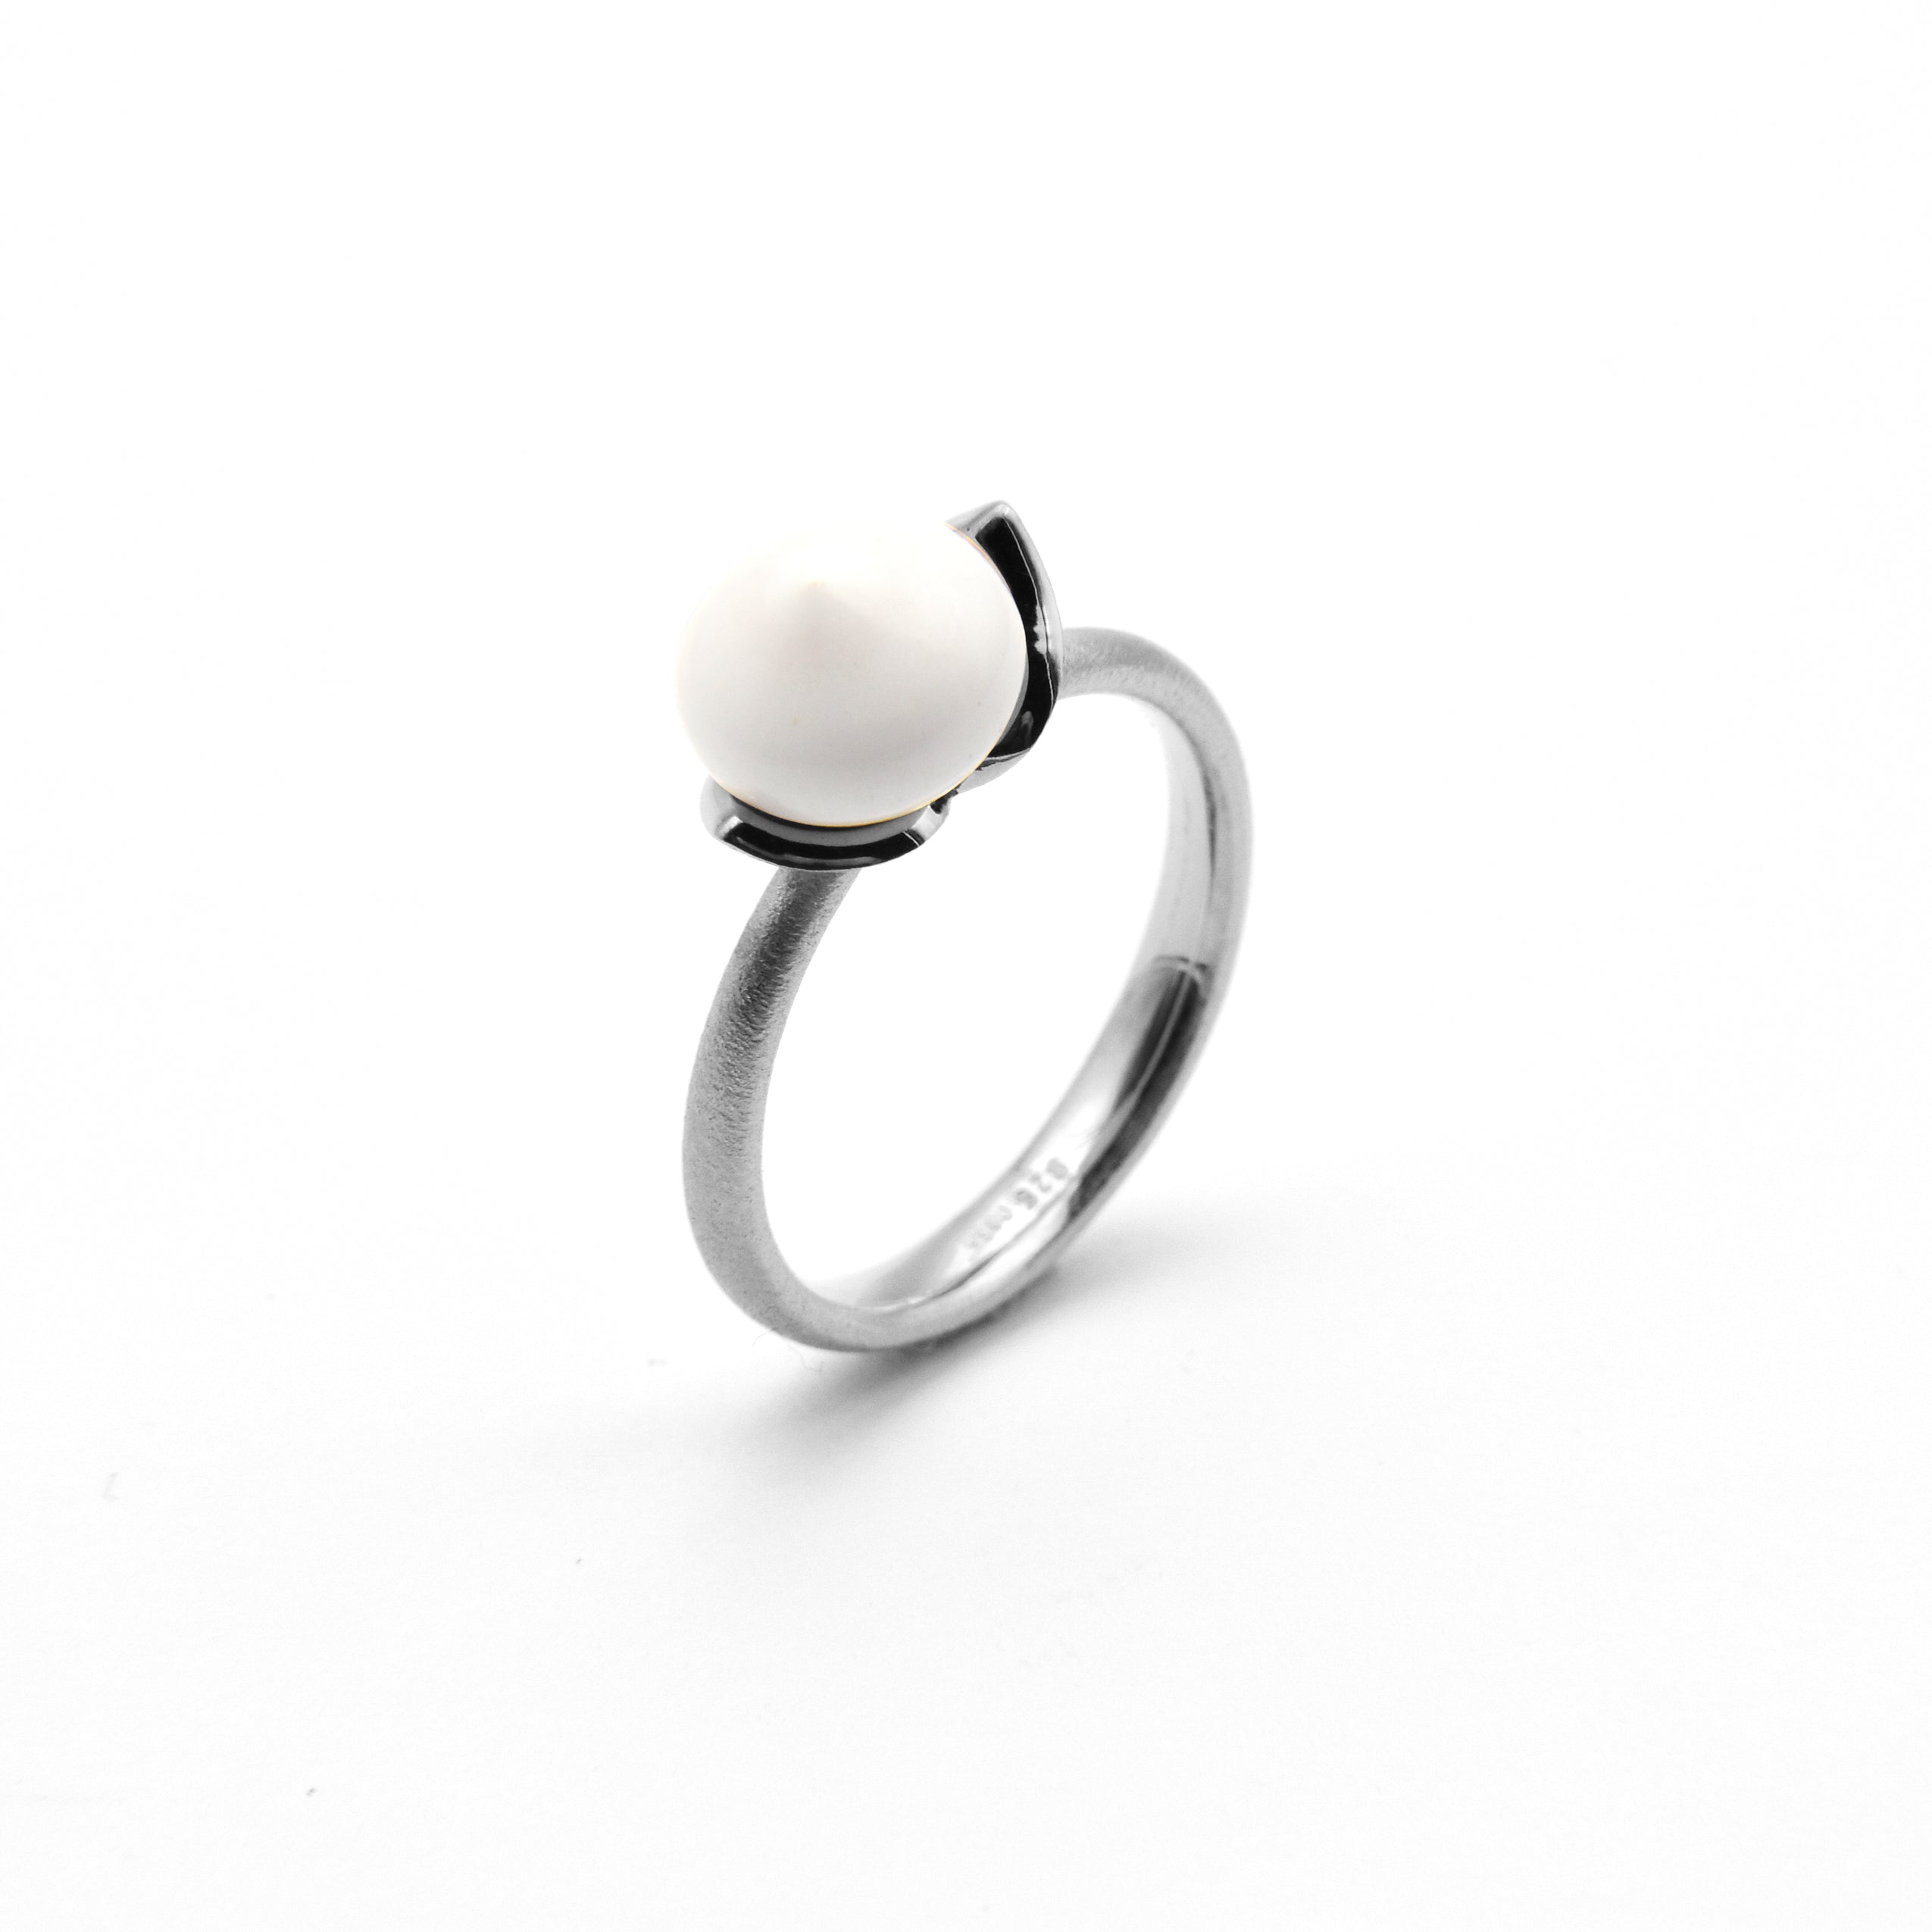 Dolce ring "smal" with Kascholong 925/-